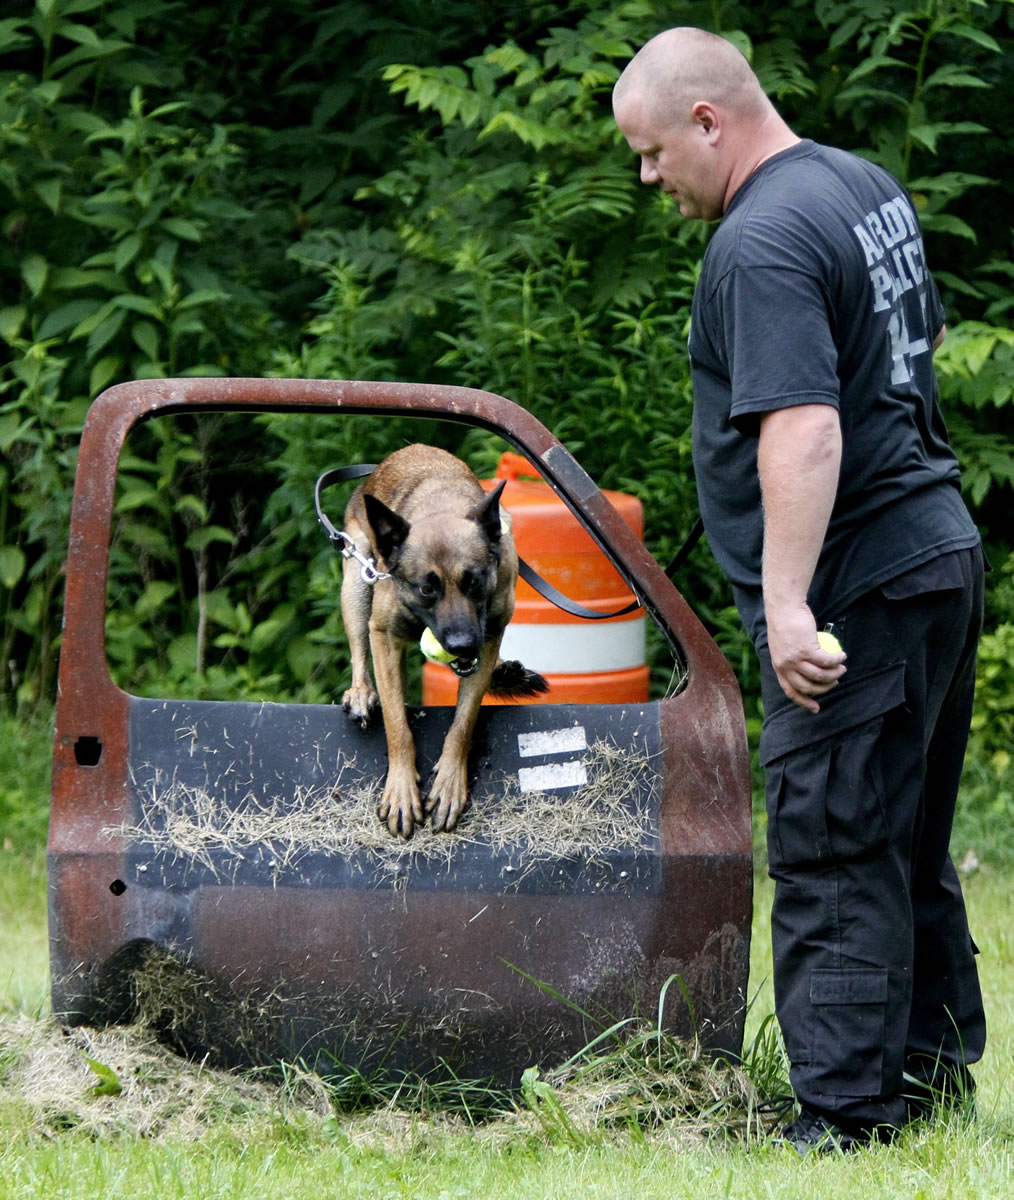 &quot;Recon,&quot; an Akron, Ohio, Police K-9 dog, leaps through a car door under the supervision of Akron Police Officer Darren McConnell at the old Akron Police shooting range last month.